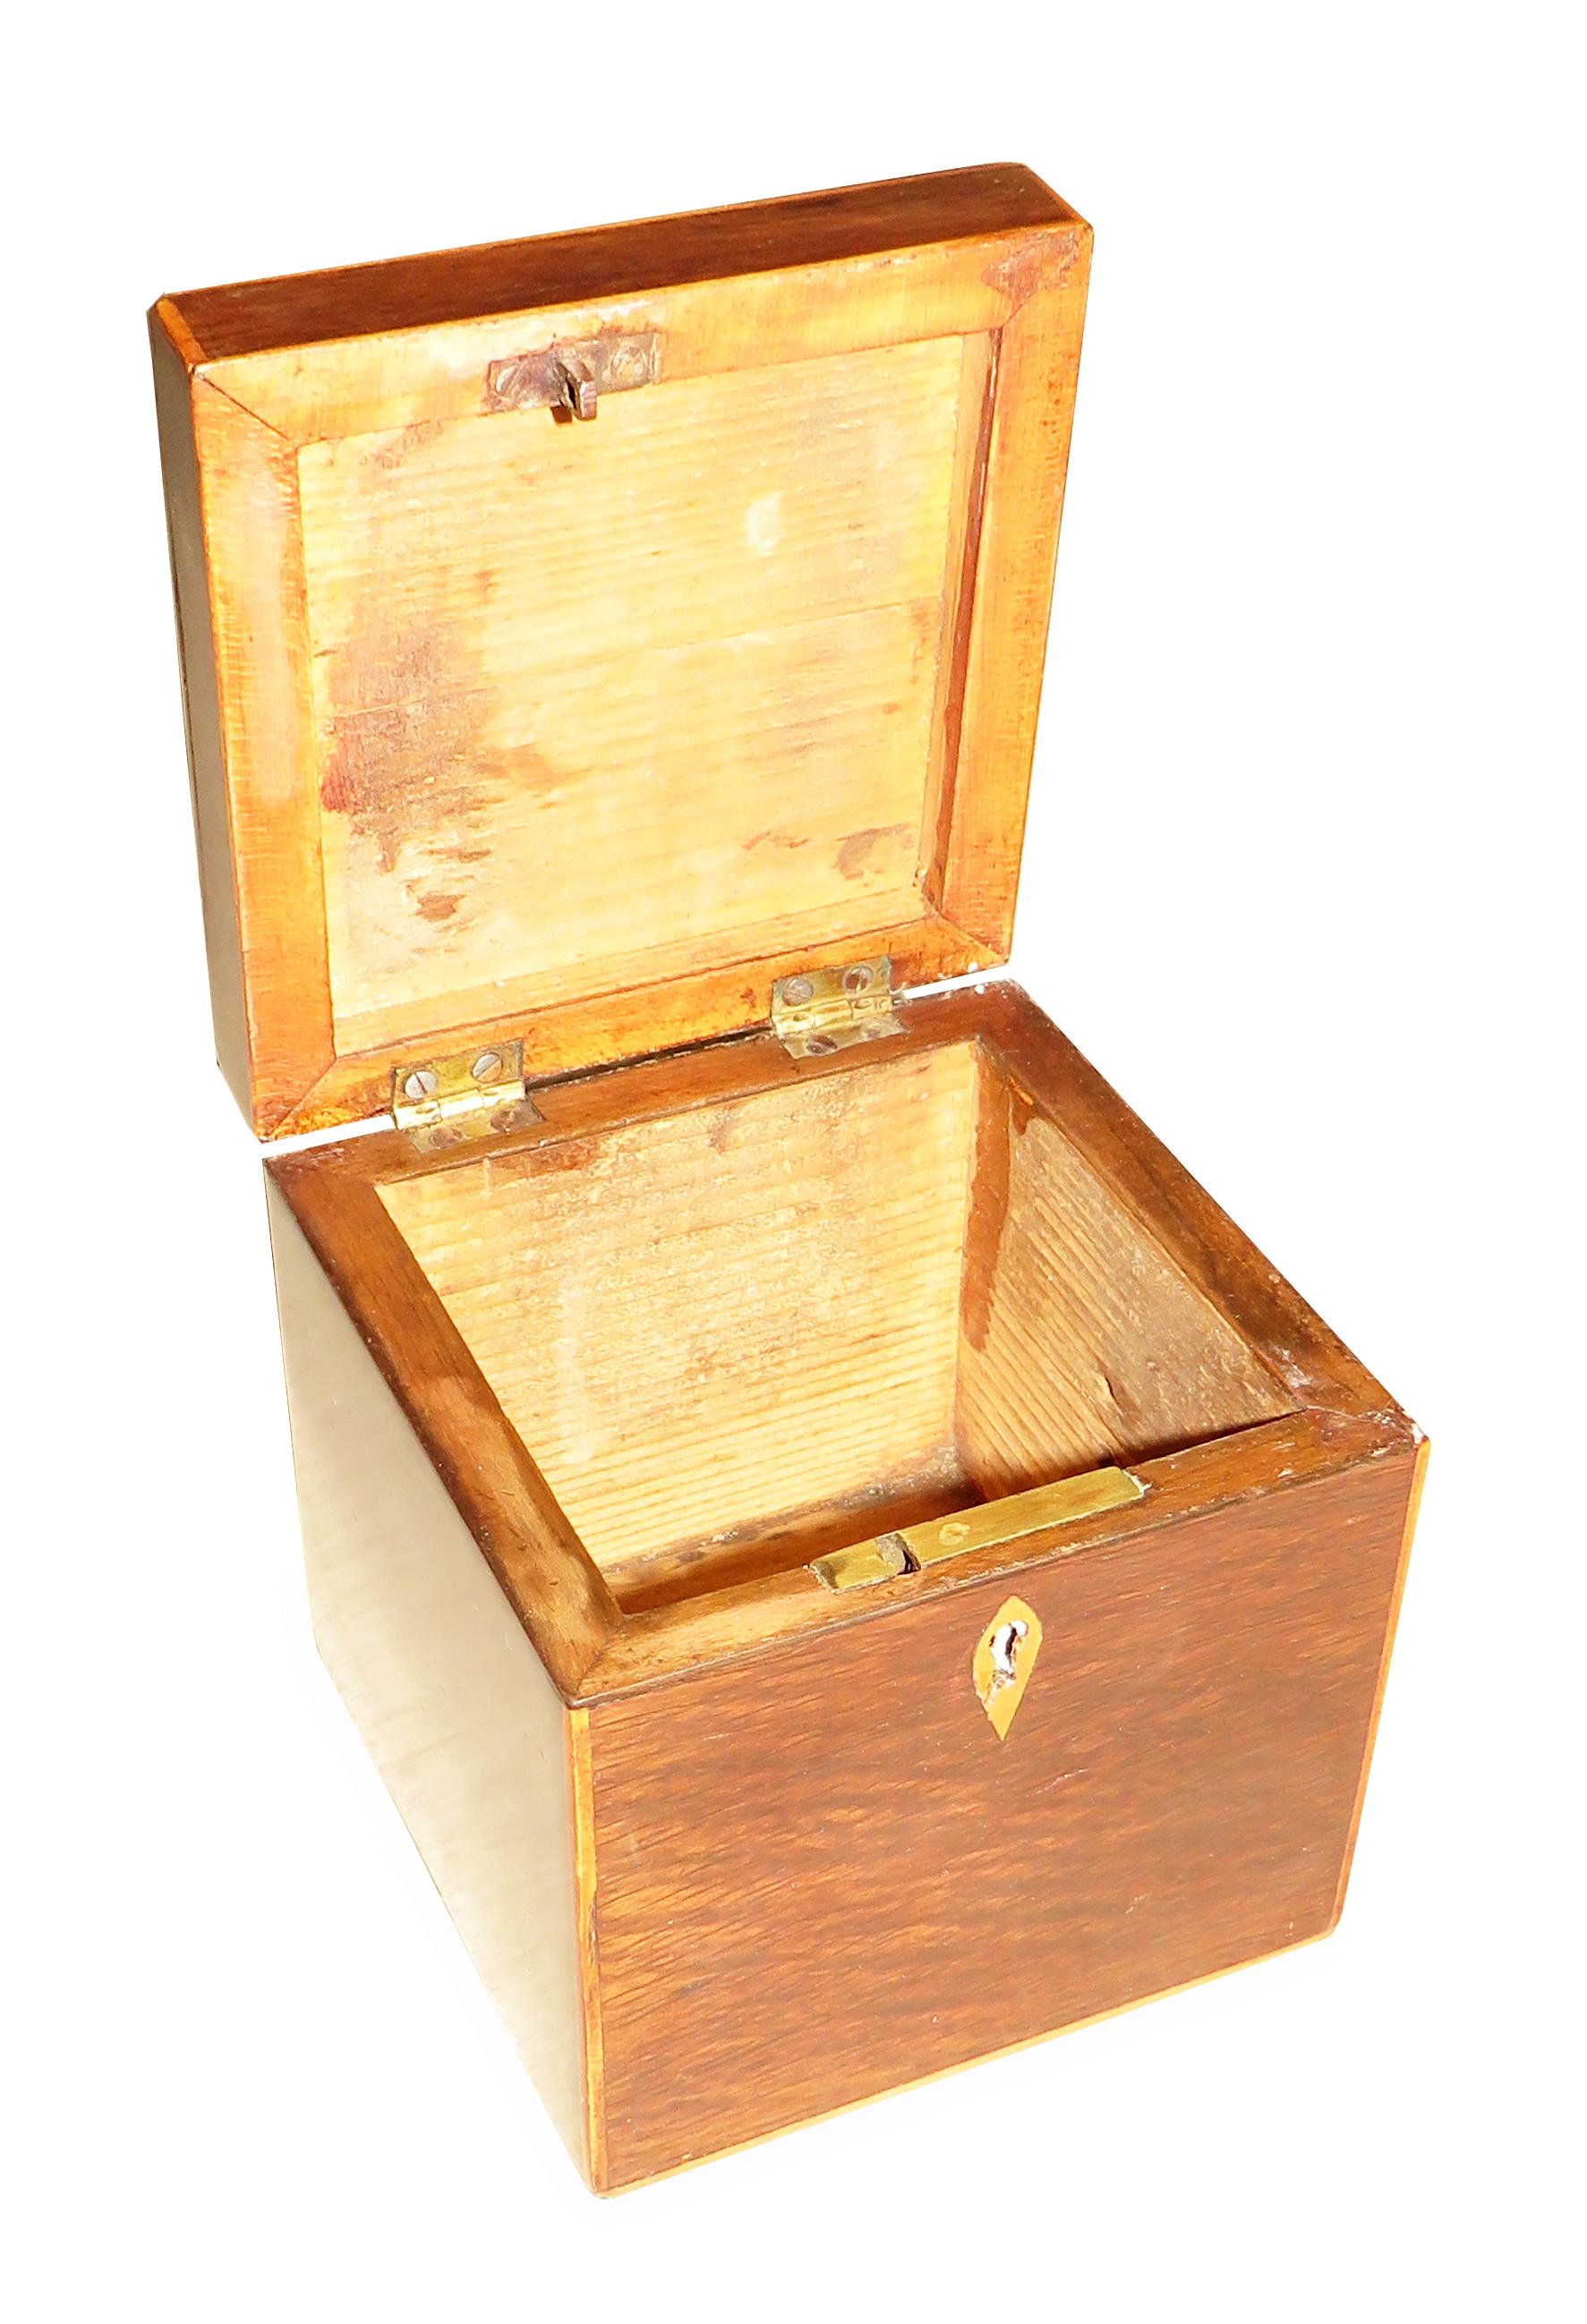 An attractive and well figured, late 18th century
Square rosewood tea caddy having boxwood
Stringing and key escutcheon with original brass
Hinges to lid and working lock and key

(Tea was a precious commodity in the 18th century and
tea